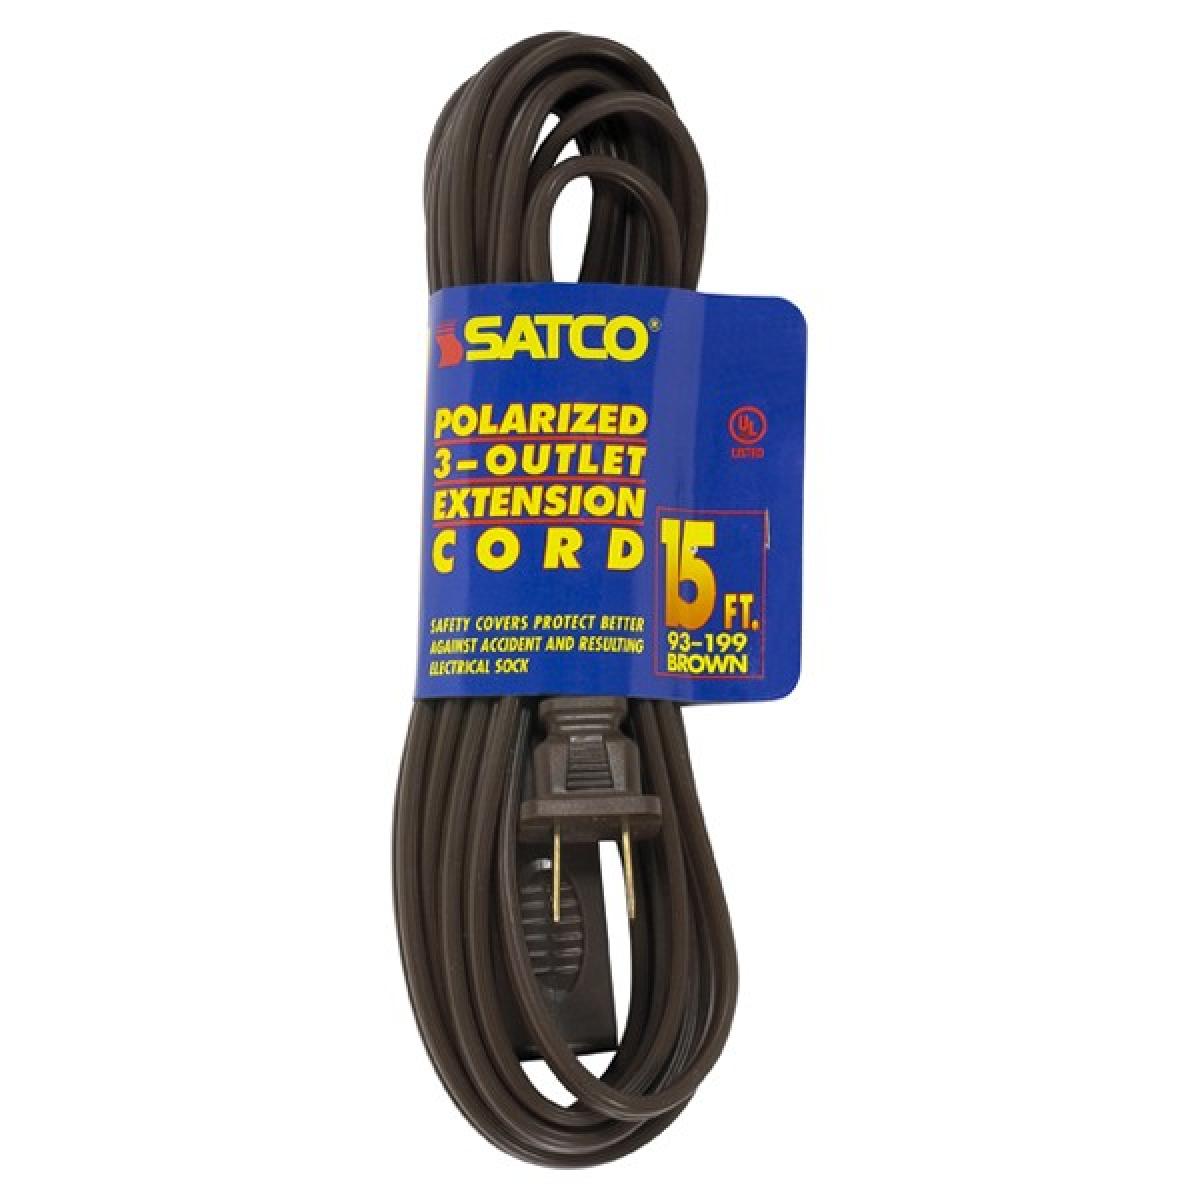 Satco 93-199 15 Foot Extension Cord Brown Finish 16/2 SPT-2 Indoor Only 13A-125V-1625W Rating